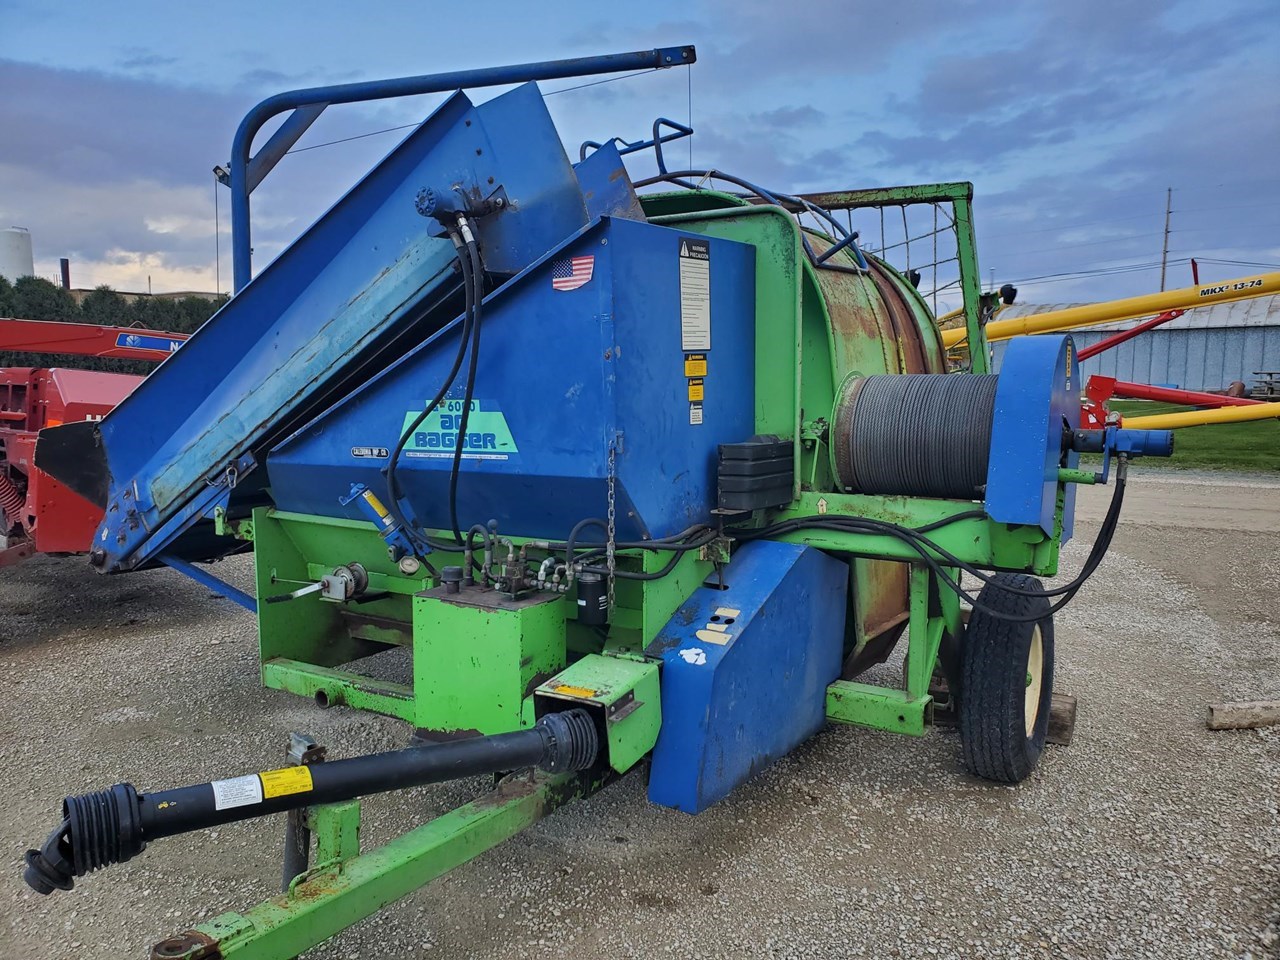 Ag-Bag G-6000 Grinder Mixer For Sale in Caledonia Minnesota